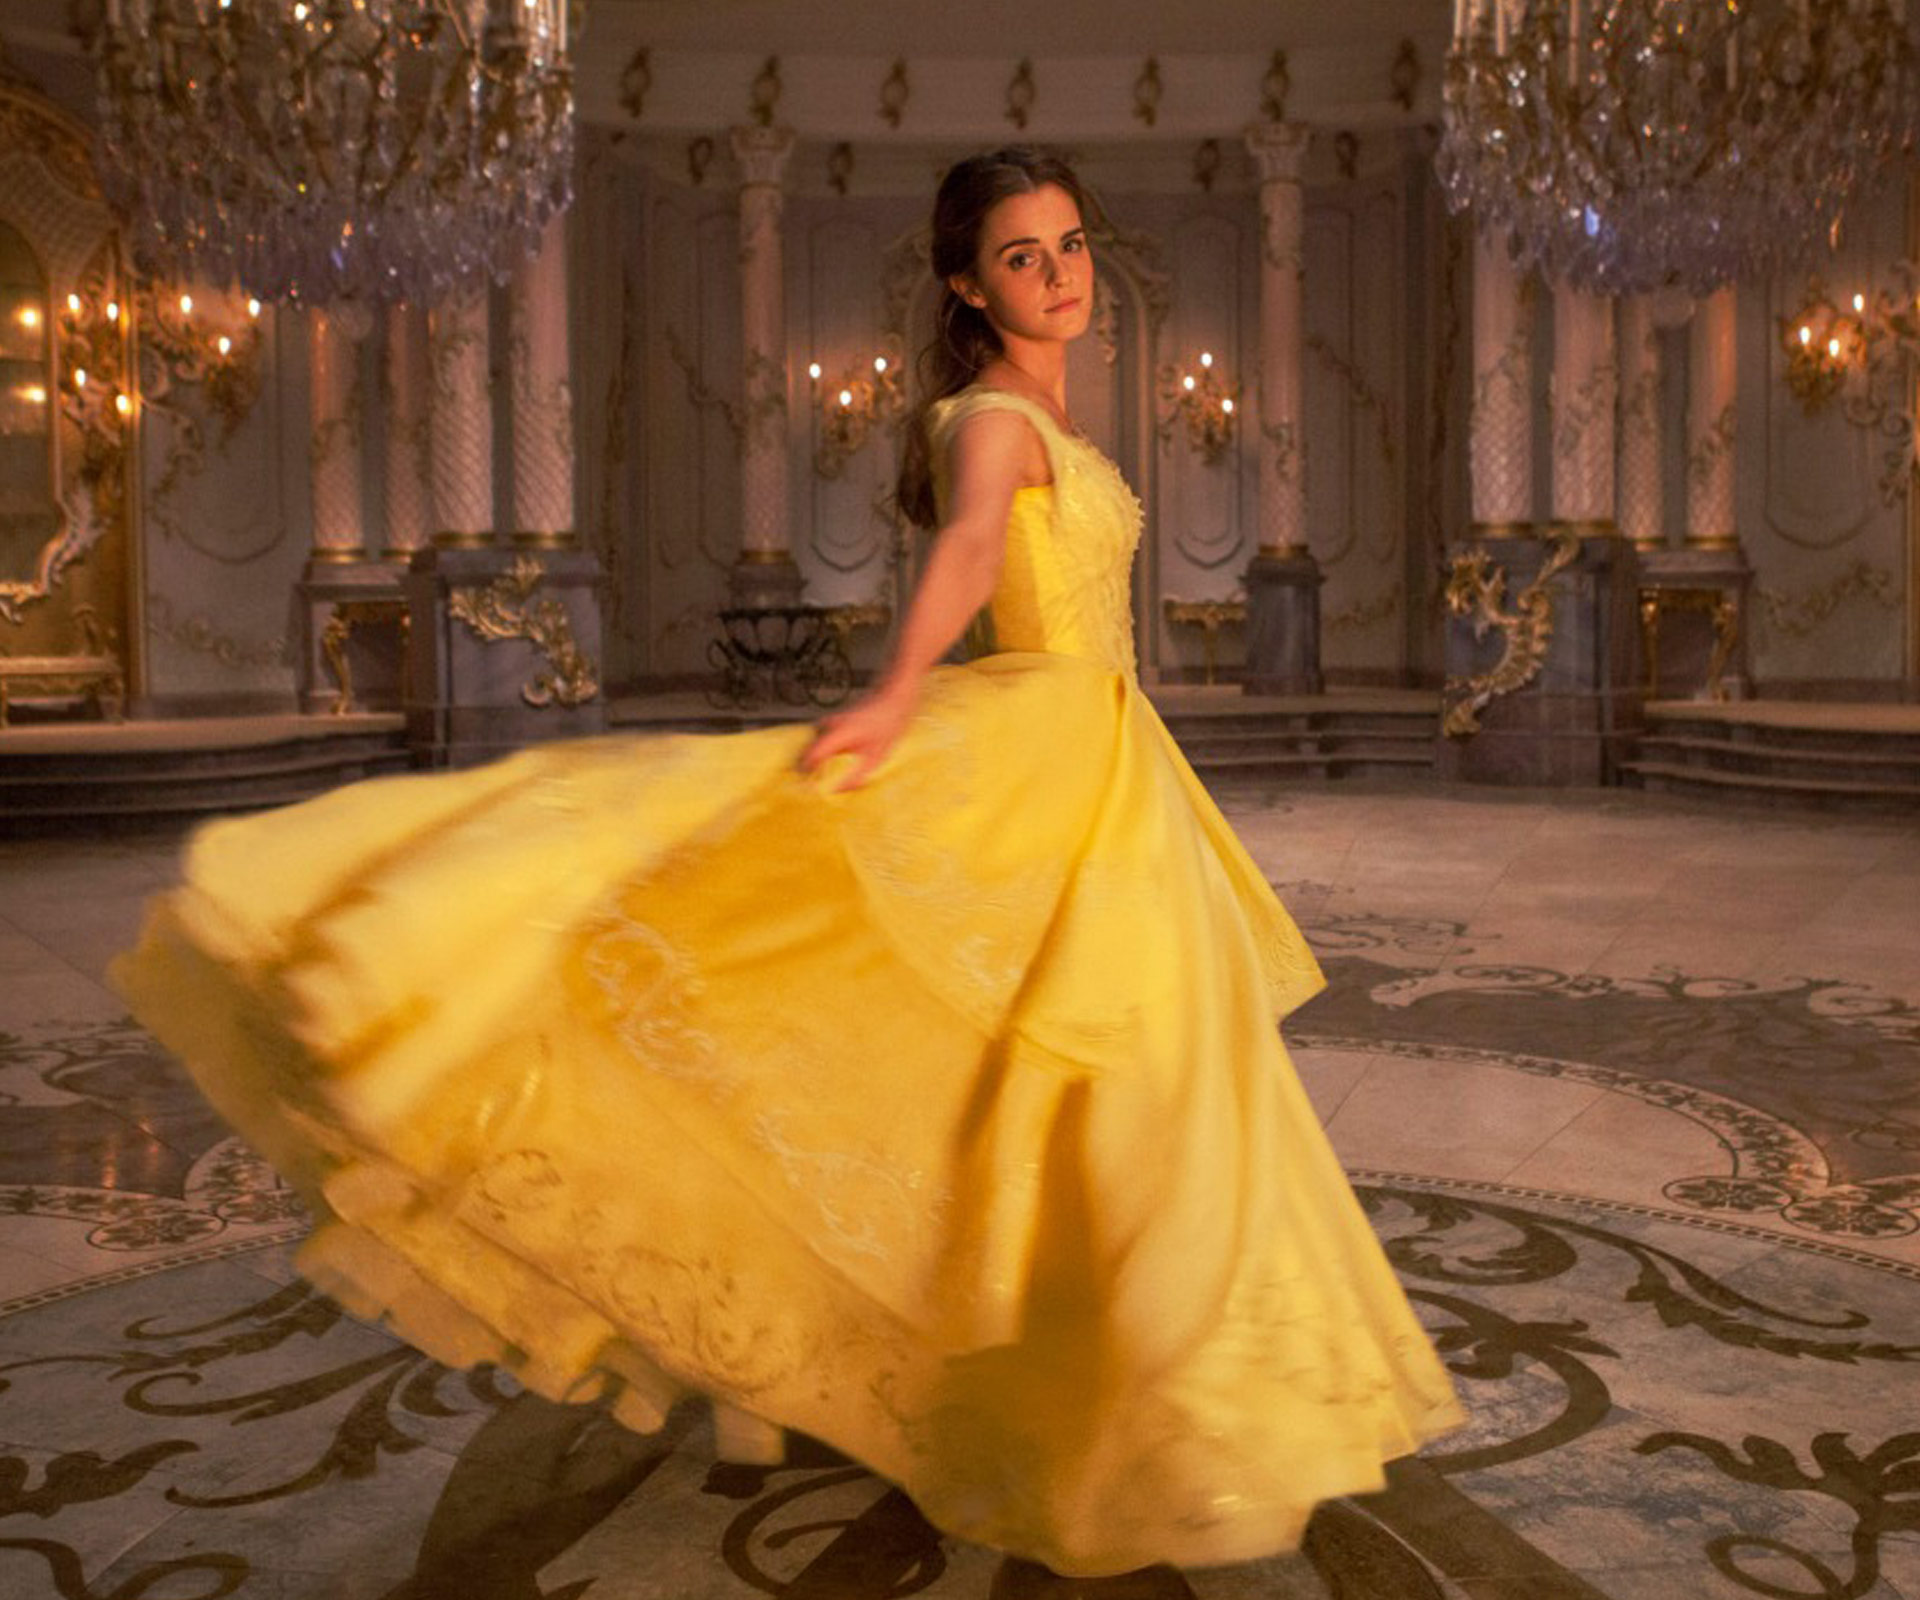 beauty and the beast oscar nominations